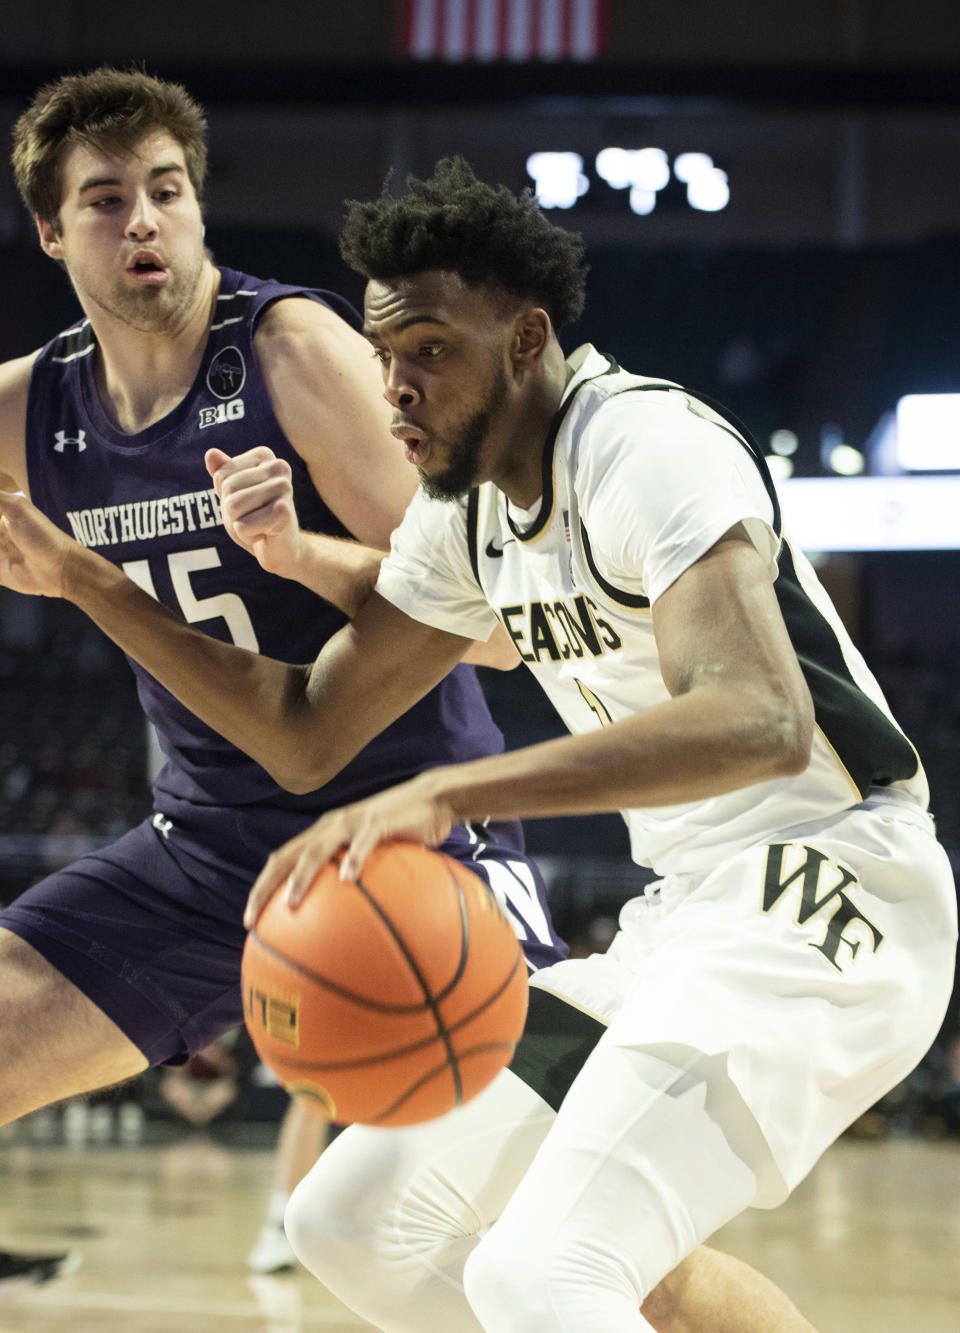 Wake Forest \ forward Isaiah Mucius (1) dribbles around the defense of Northwestern center Ryan Young (15) in the first half of an NCAA college basketball game on Tuesday, Nov. 30, 2021, at the Joel Coliseum in Winston-Salem, N.C. (Allison Lee Isley/The Winston-Salem Journal via AP)